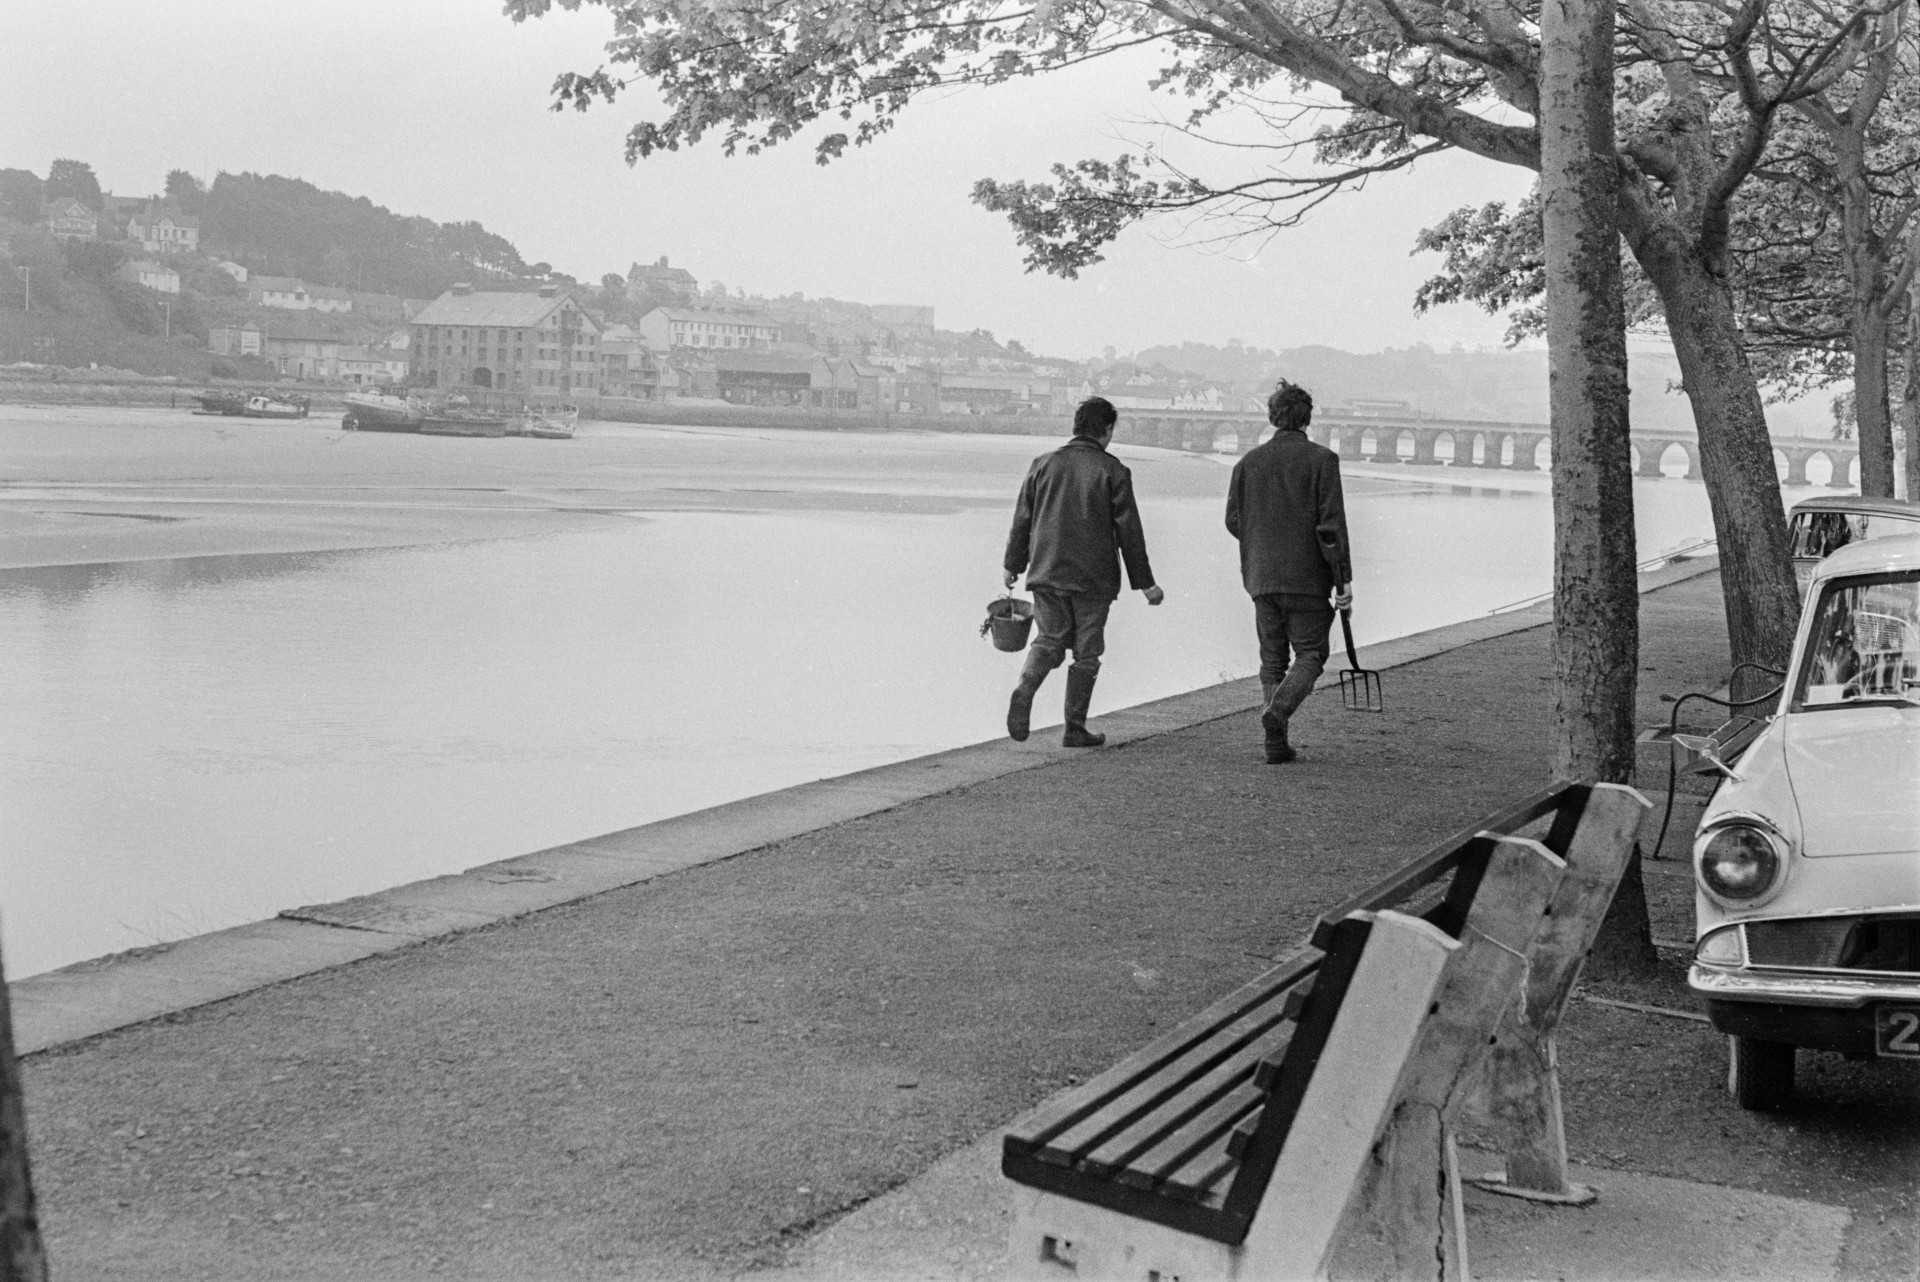 Two people walking alongside the river Torridge at Bideford. One is carrying a bucket and the other a fork. A car is parked by aa bench in the foreground. Bideford Long Bridge, also known as Bideford Old Bridge, is visible in the distance.